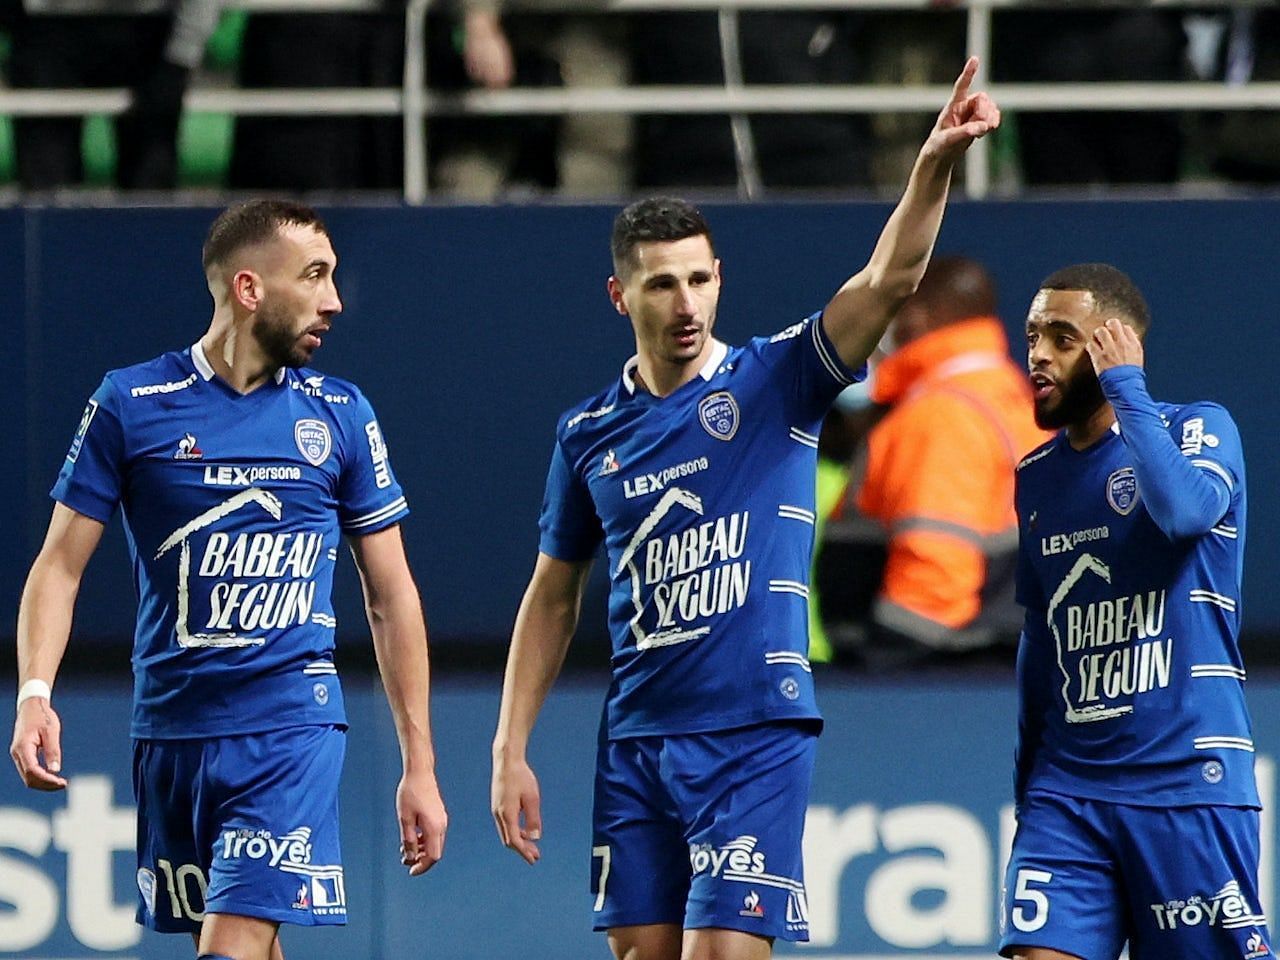 Can Troyes find a way to defeat Brest this weekend?